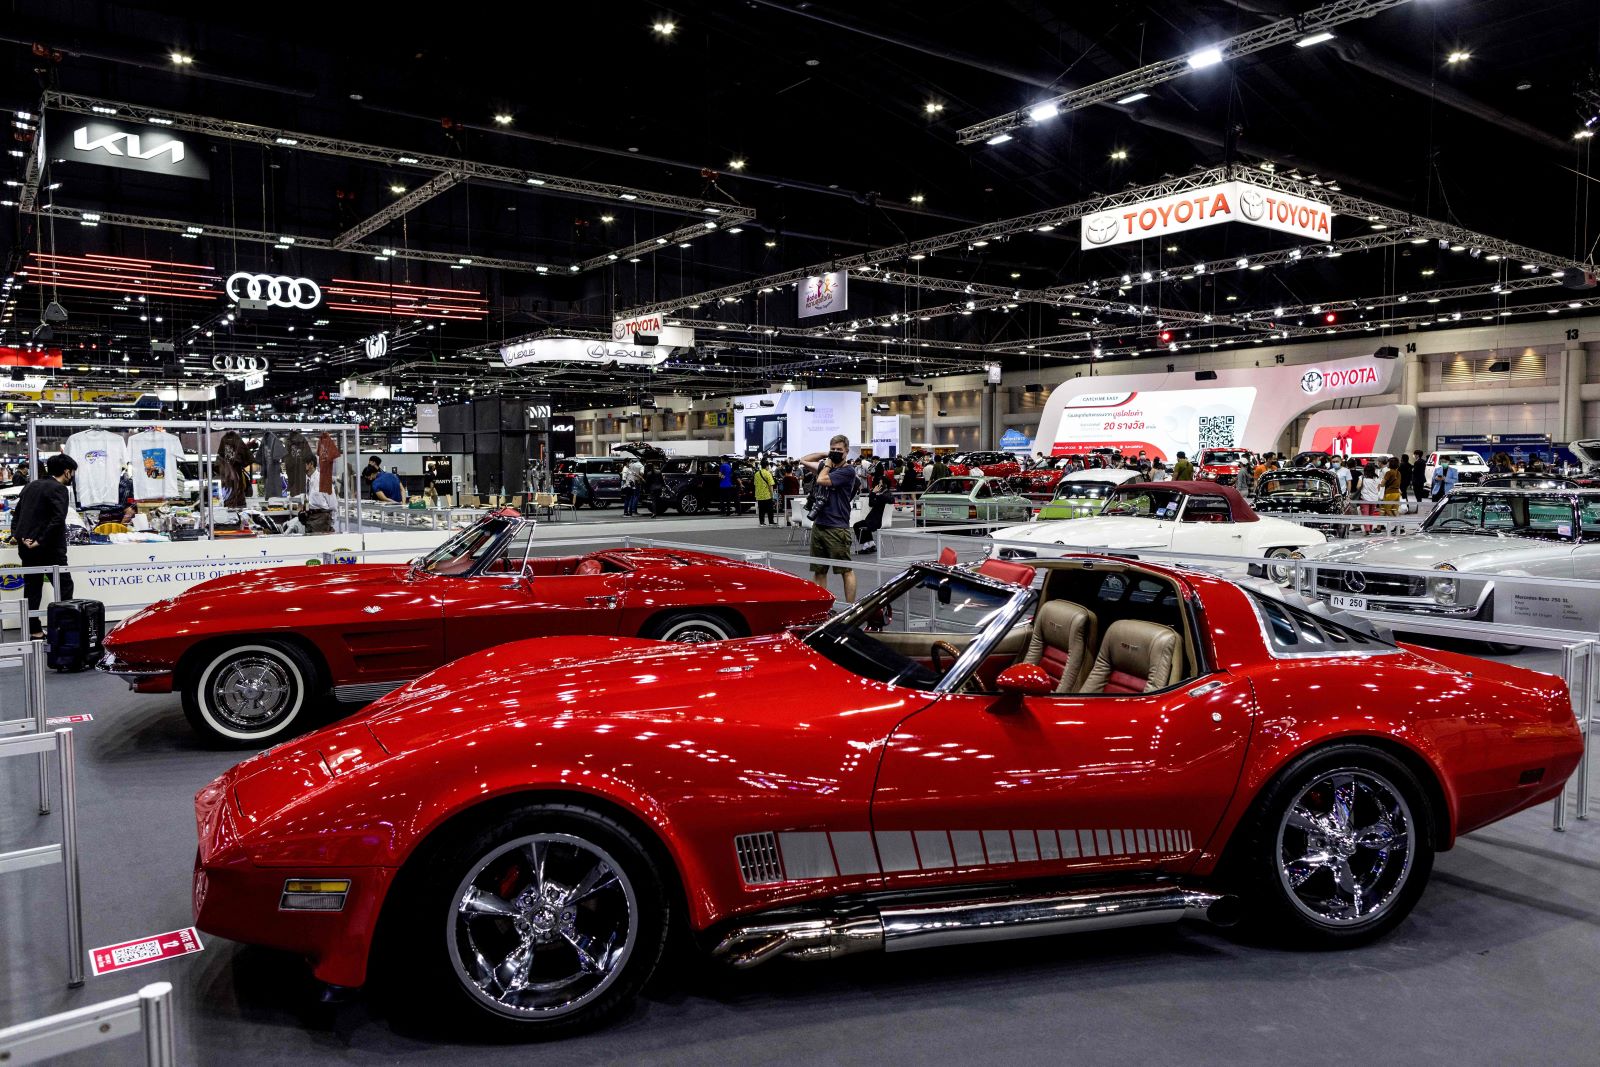 Red vintage Chevrolet Corvette classic muscle car on display at the Thailand International Motor Expo